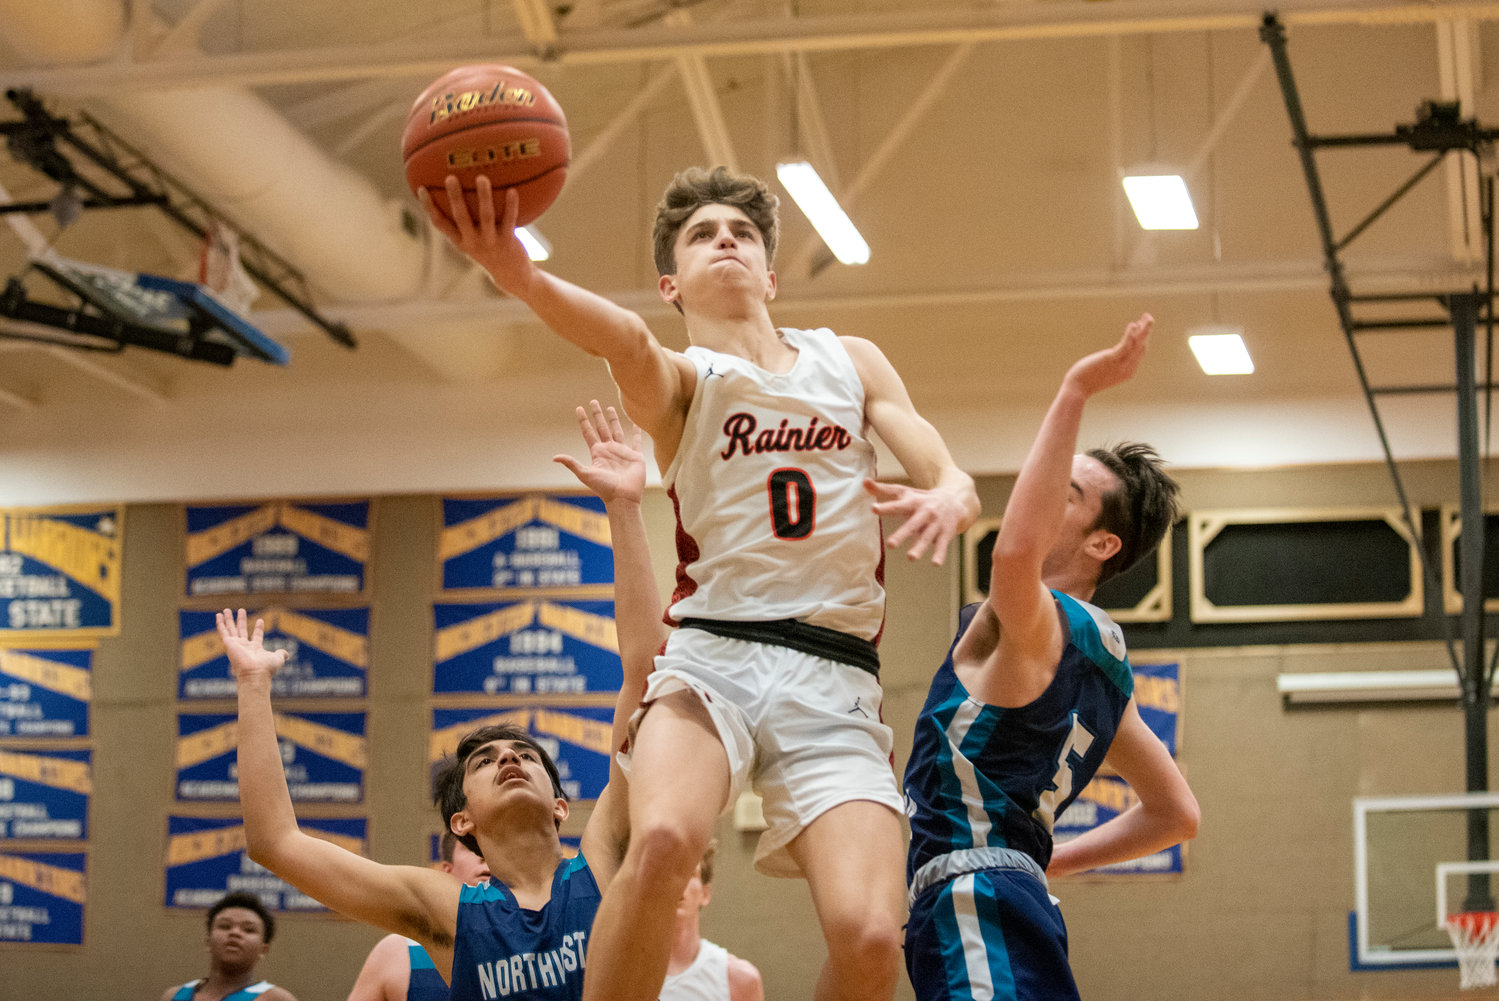 Rainier senior Ian Sprouffske (0) drives for a layup in a win over Northwest Christian (Lacey) in the district playoffs on Feb. 9 at Rochester High School.